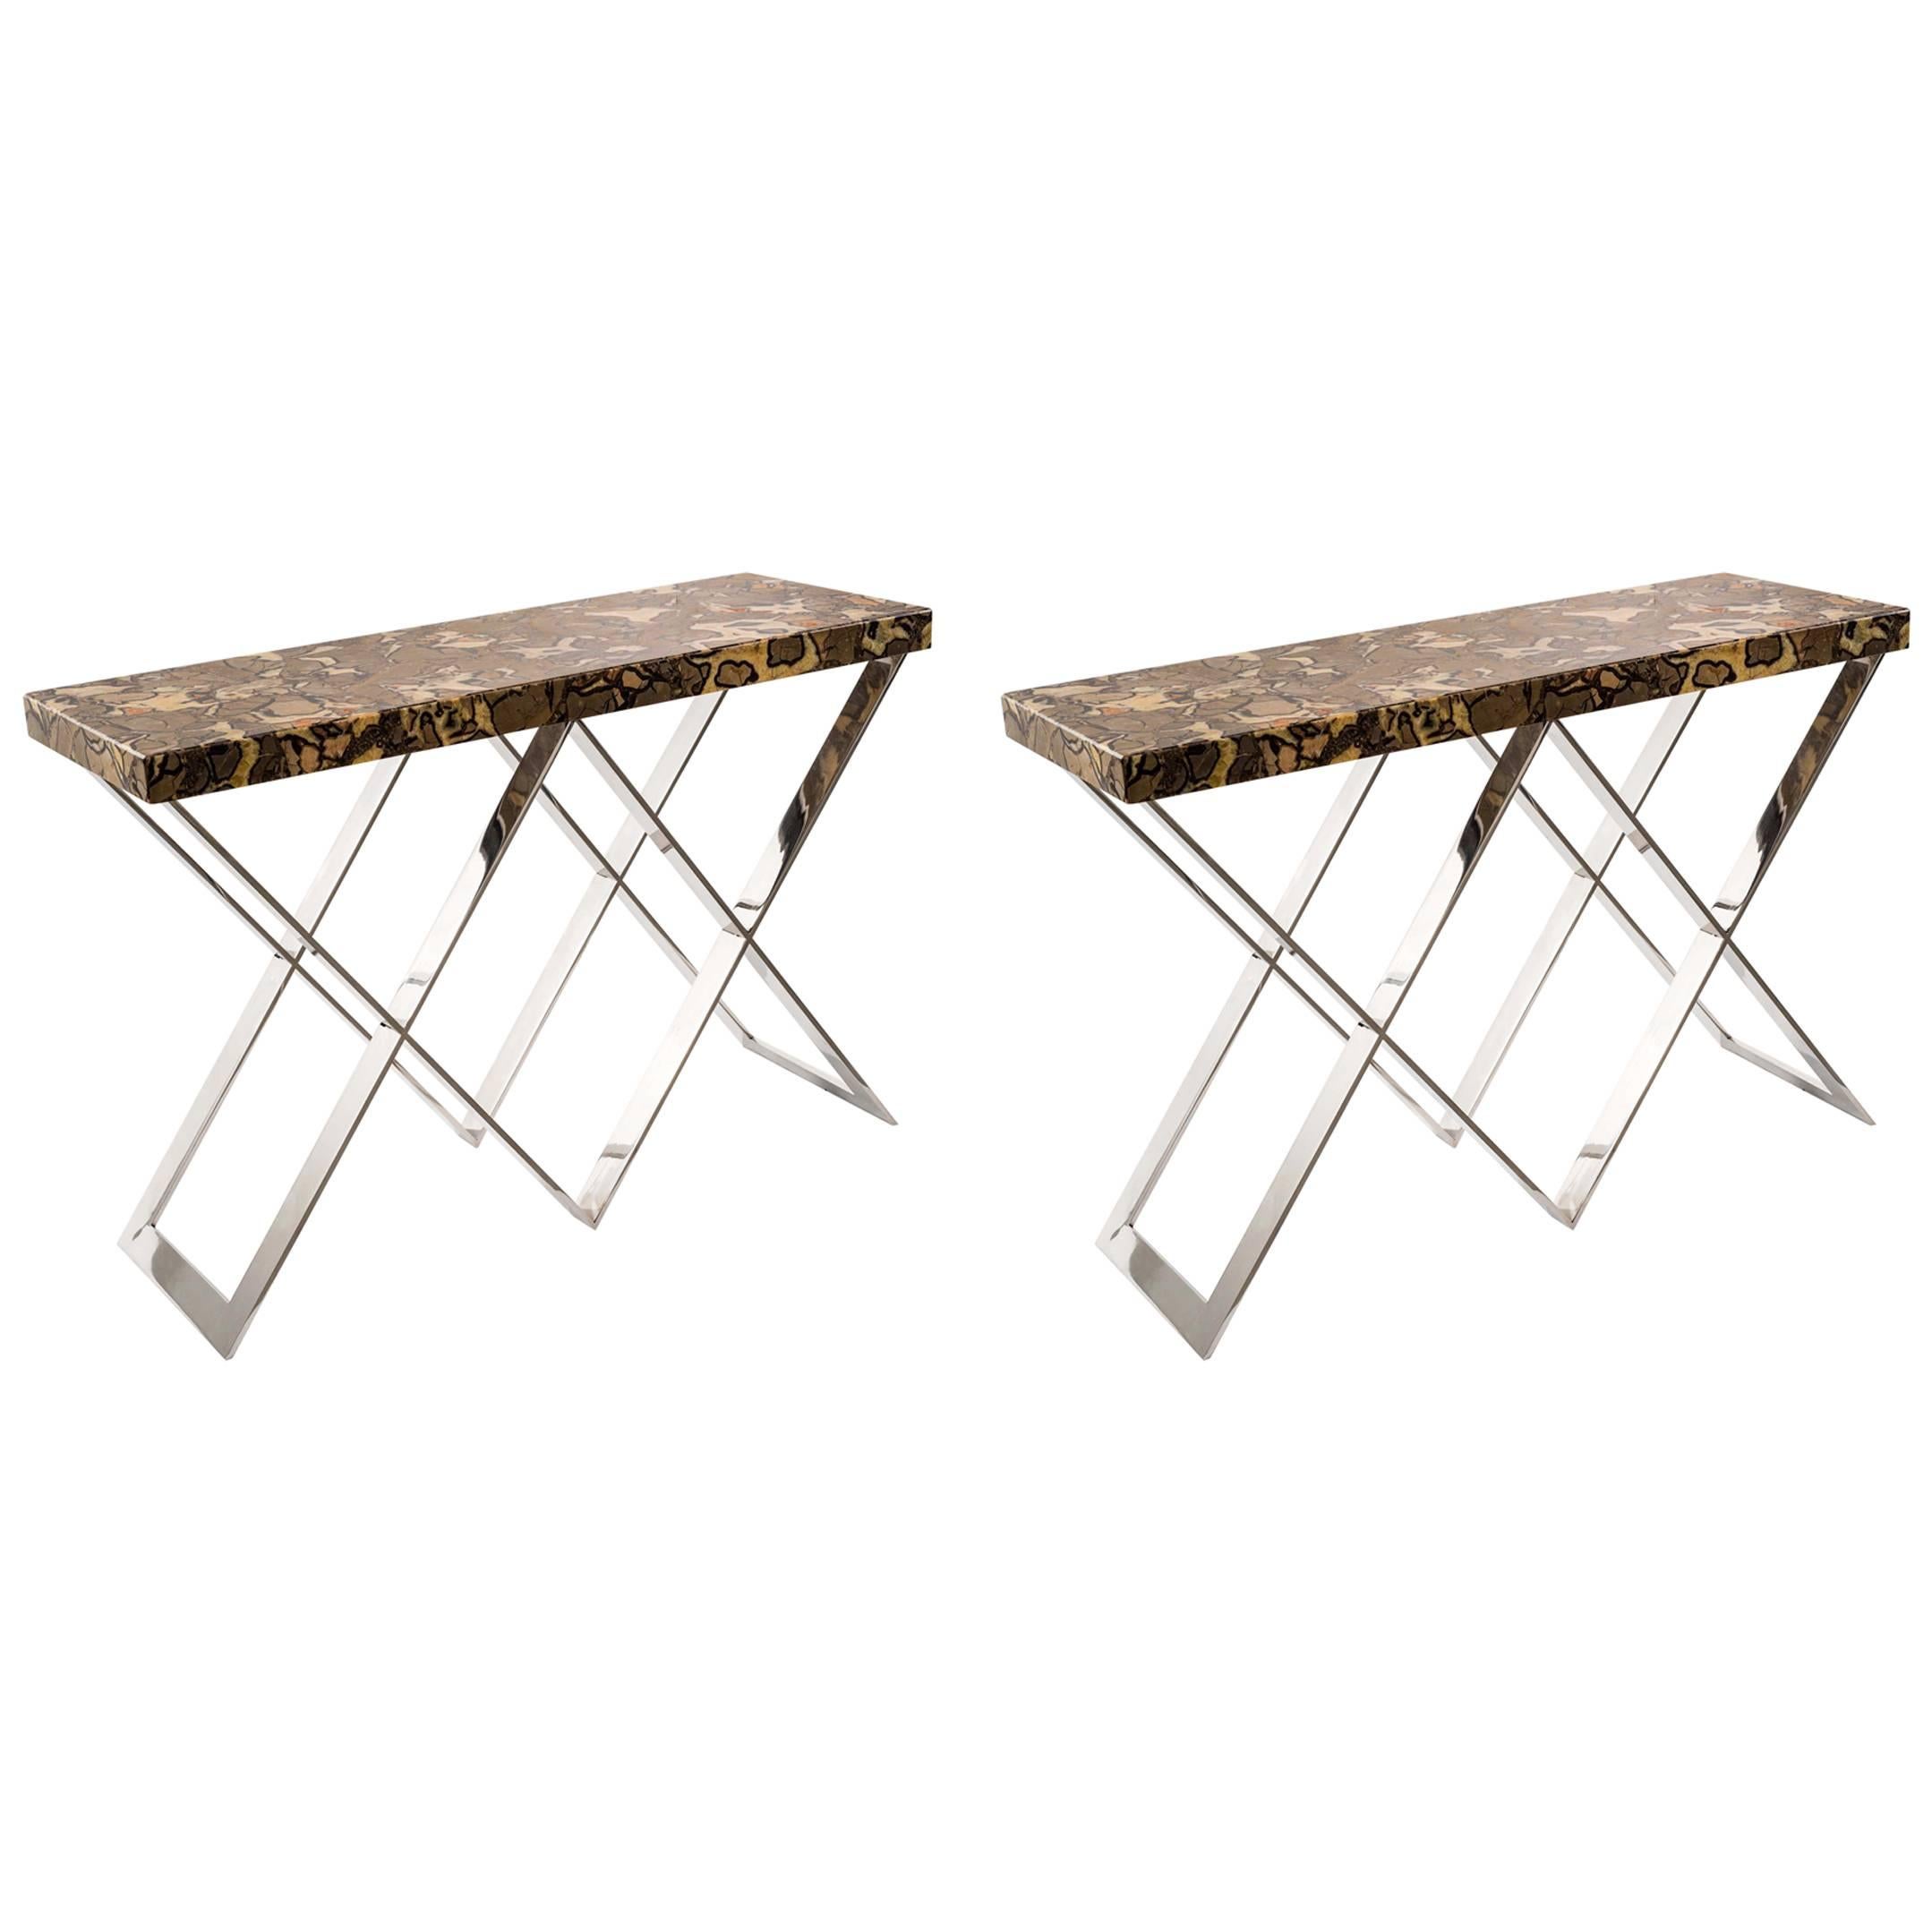  Pair of “Septaria” Marble-Top Console Tables Italian design by Monica Ballesio